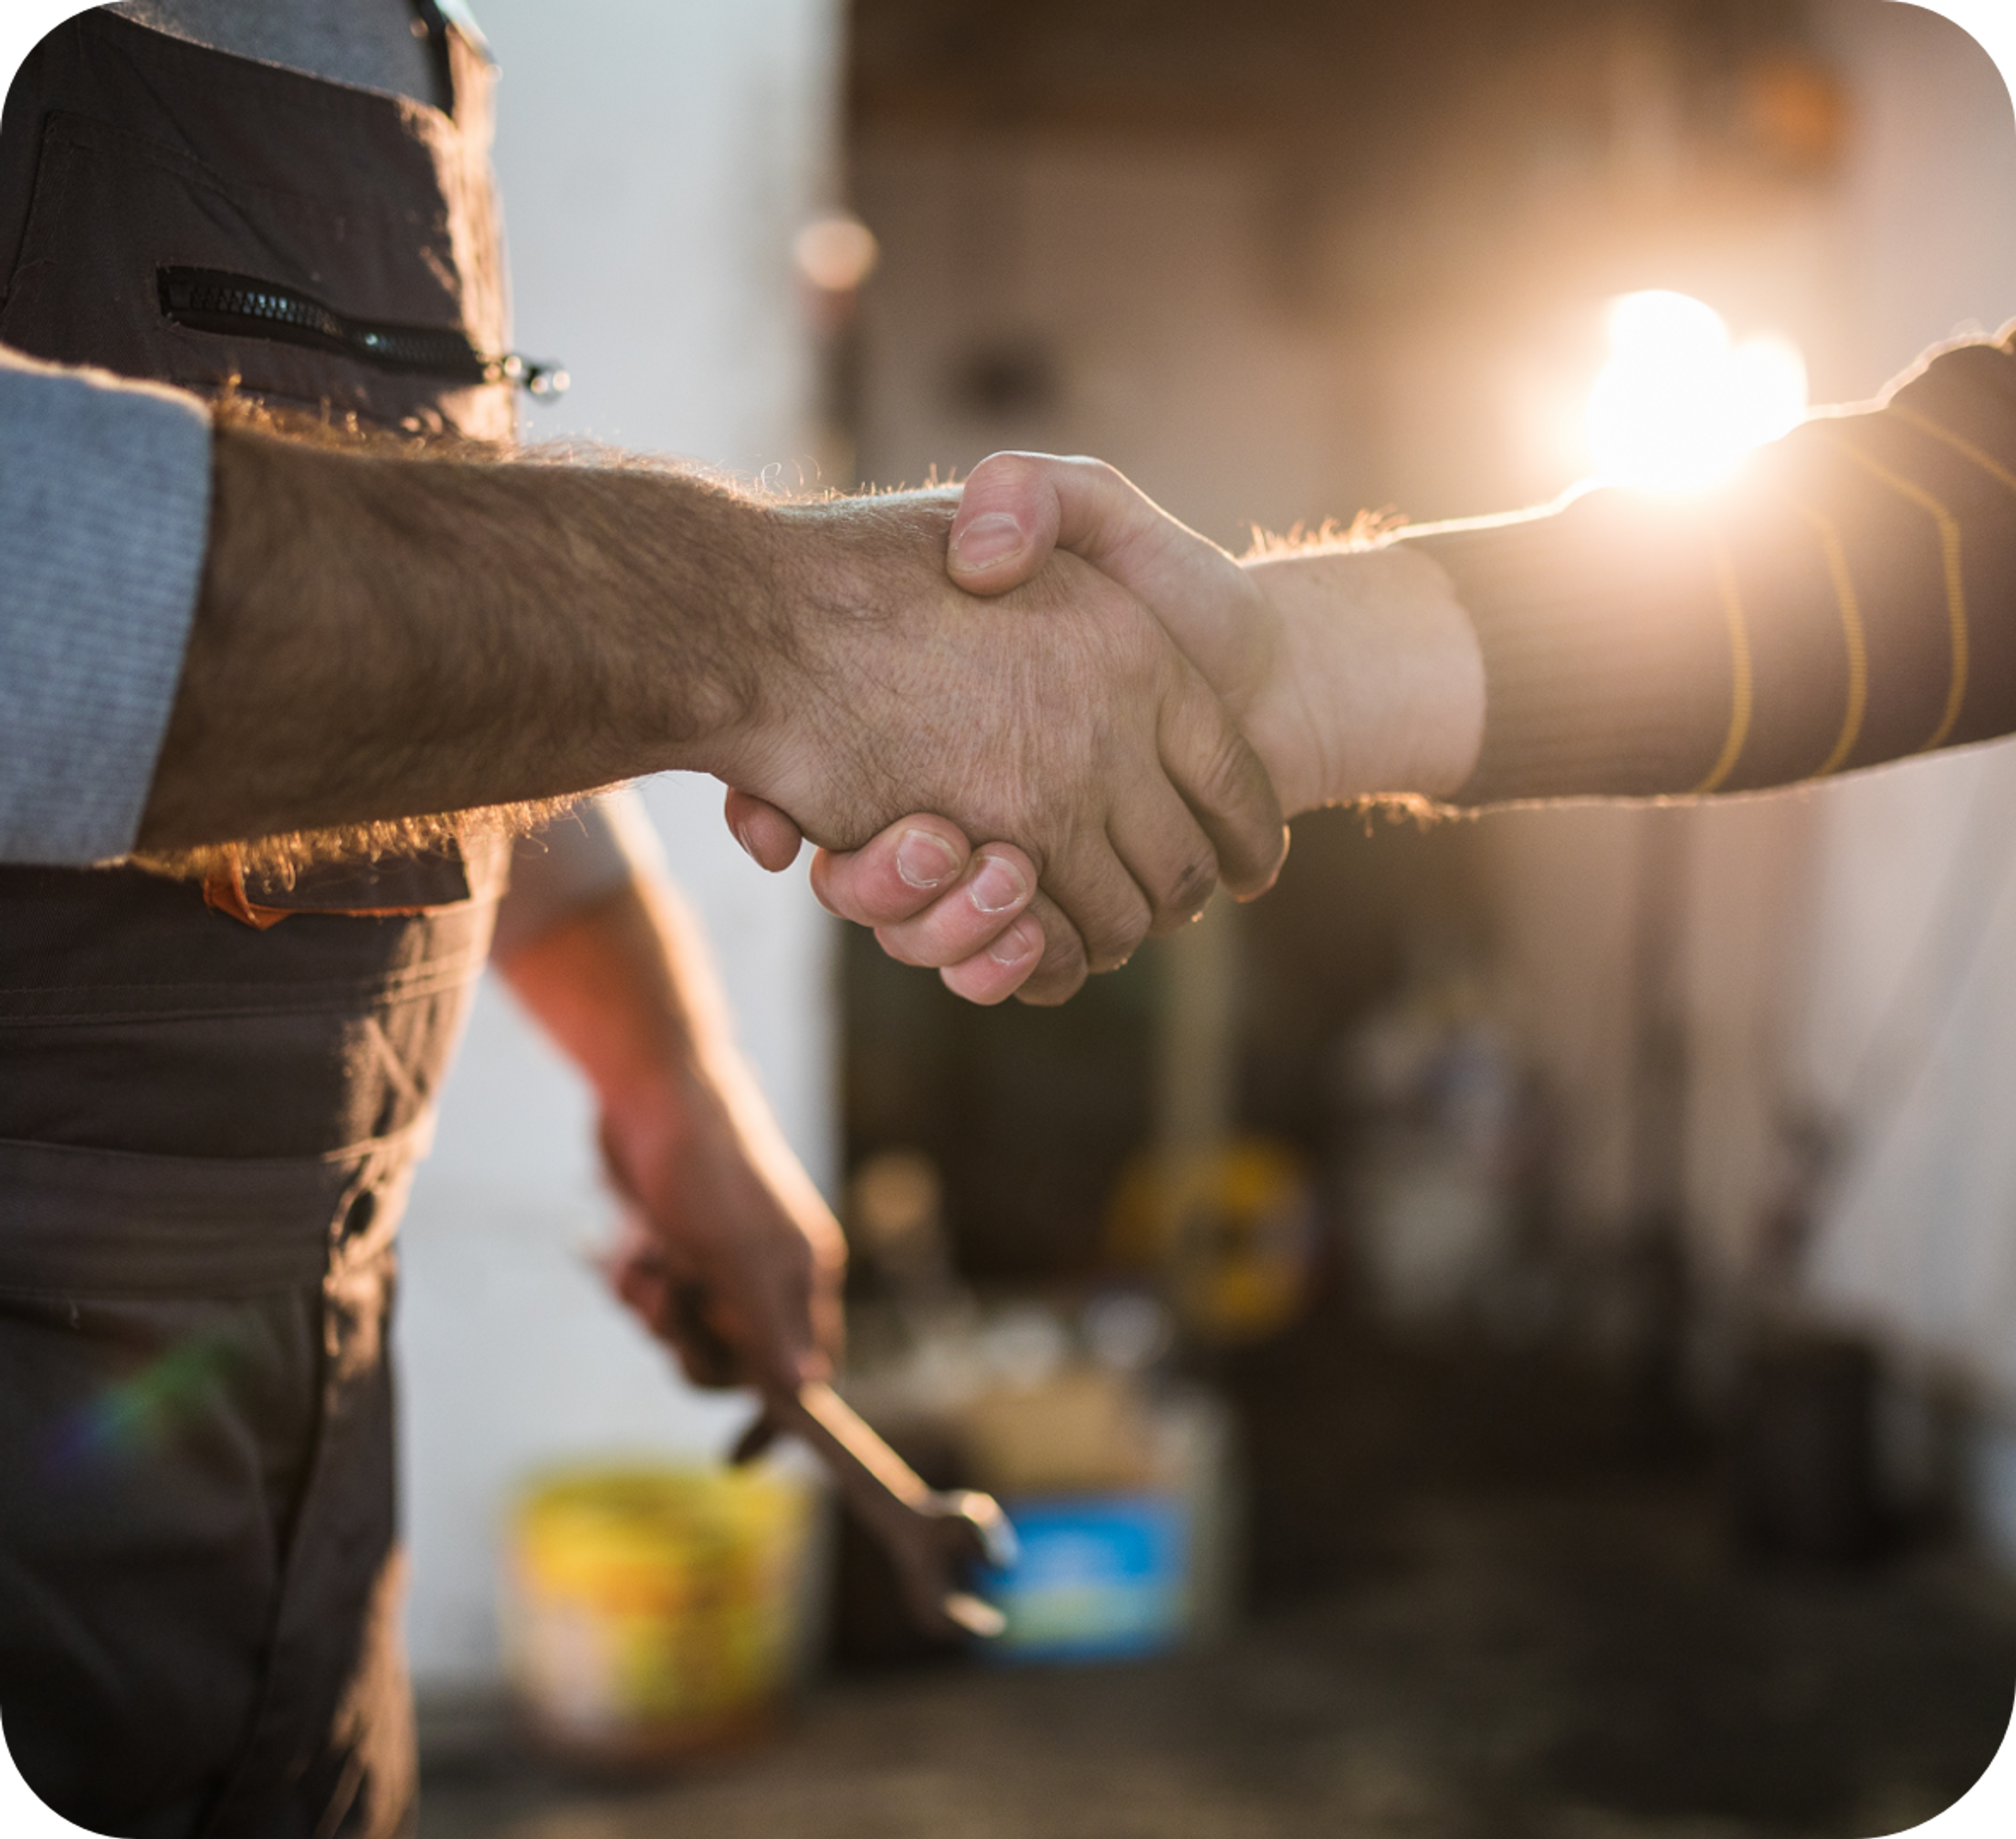 Image of two men shaking hands